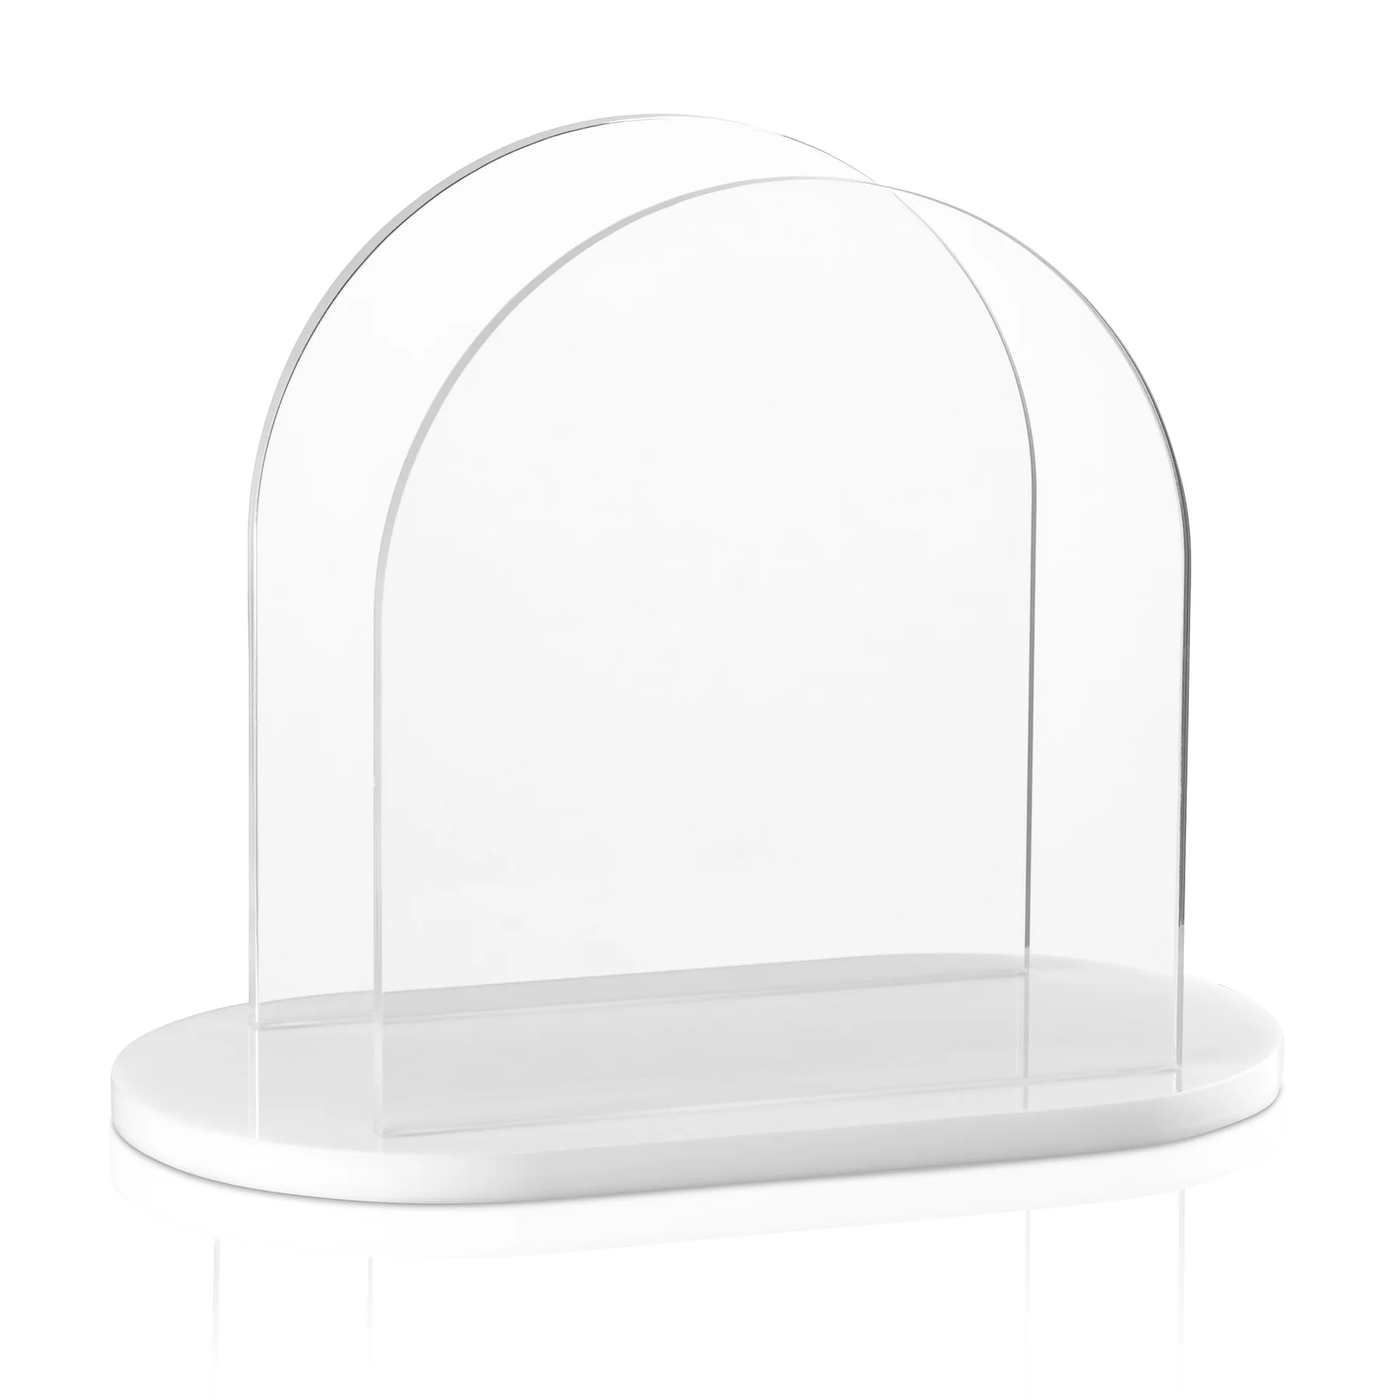 Lucite U-Shaped Napkin Holder (1 Count) - Set With Style